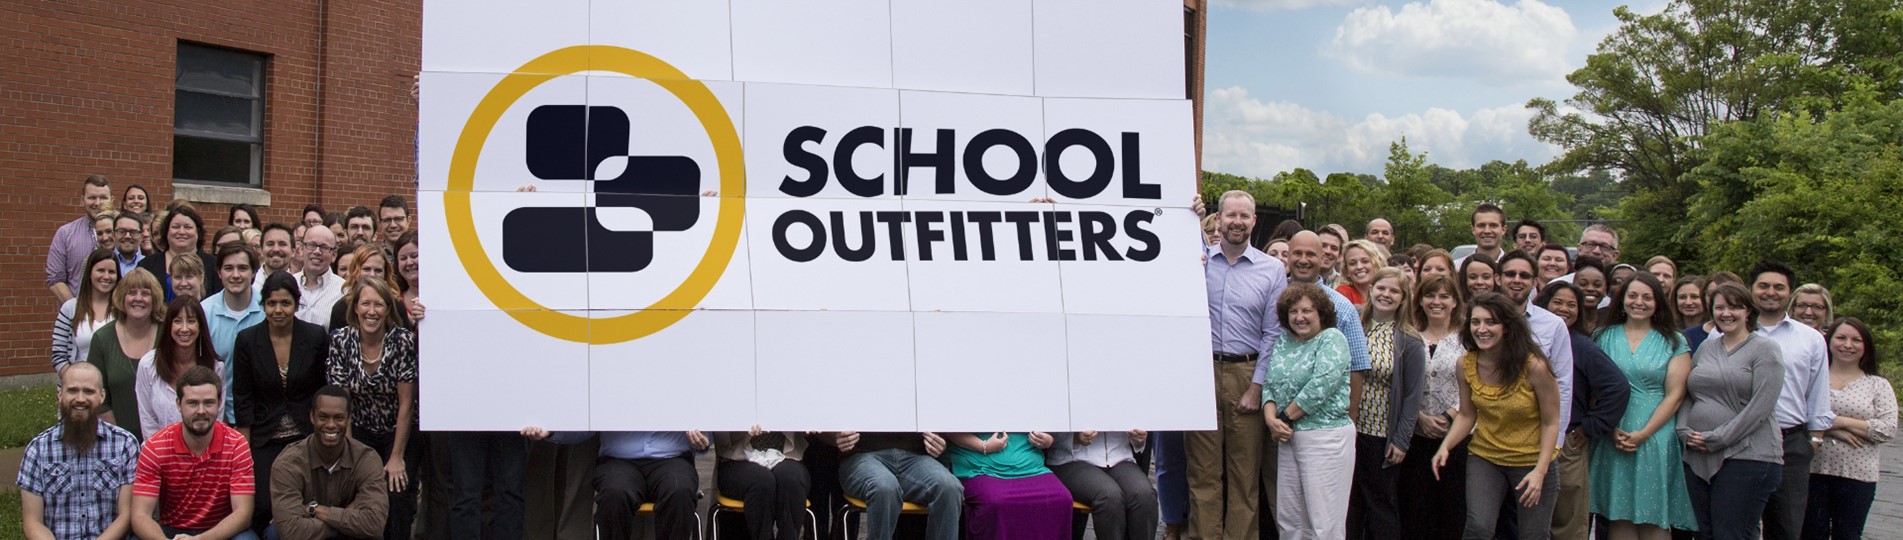 SchoolOutfitters